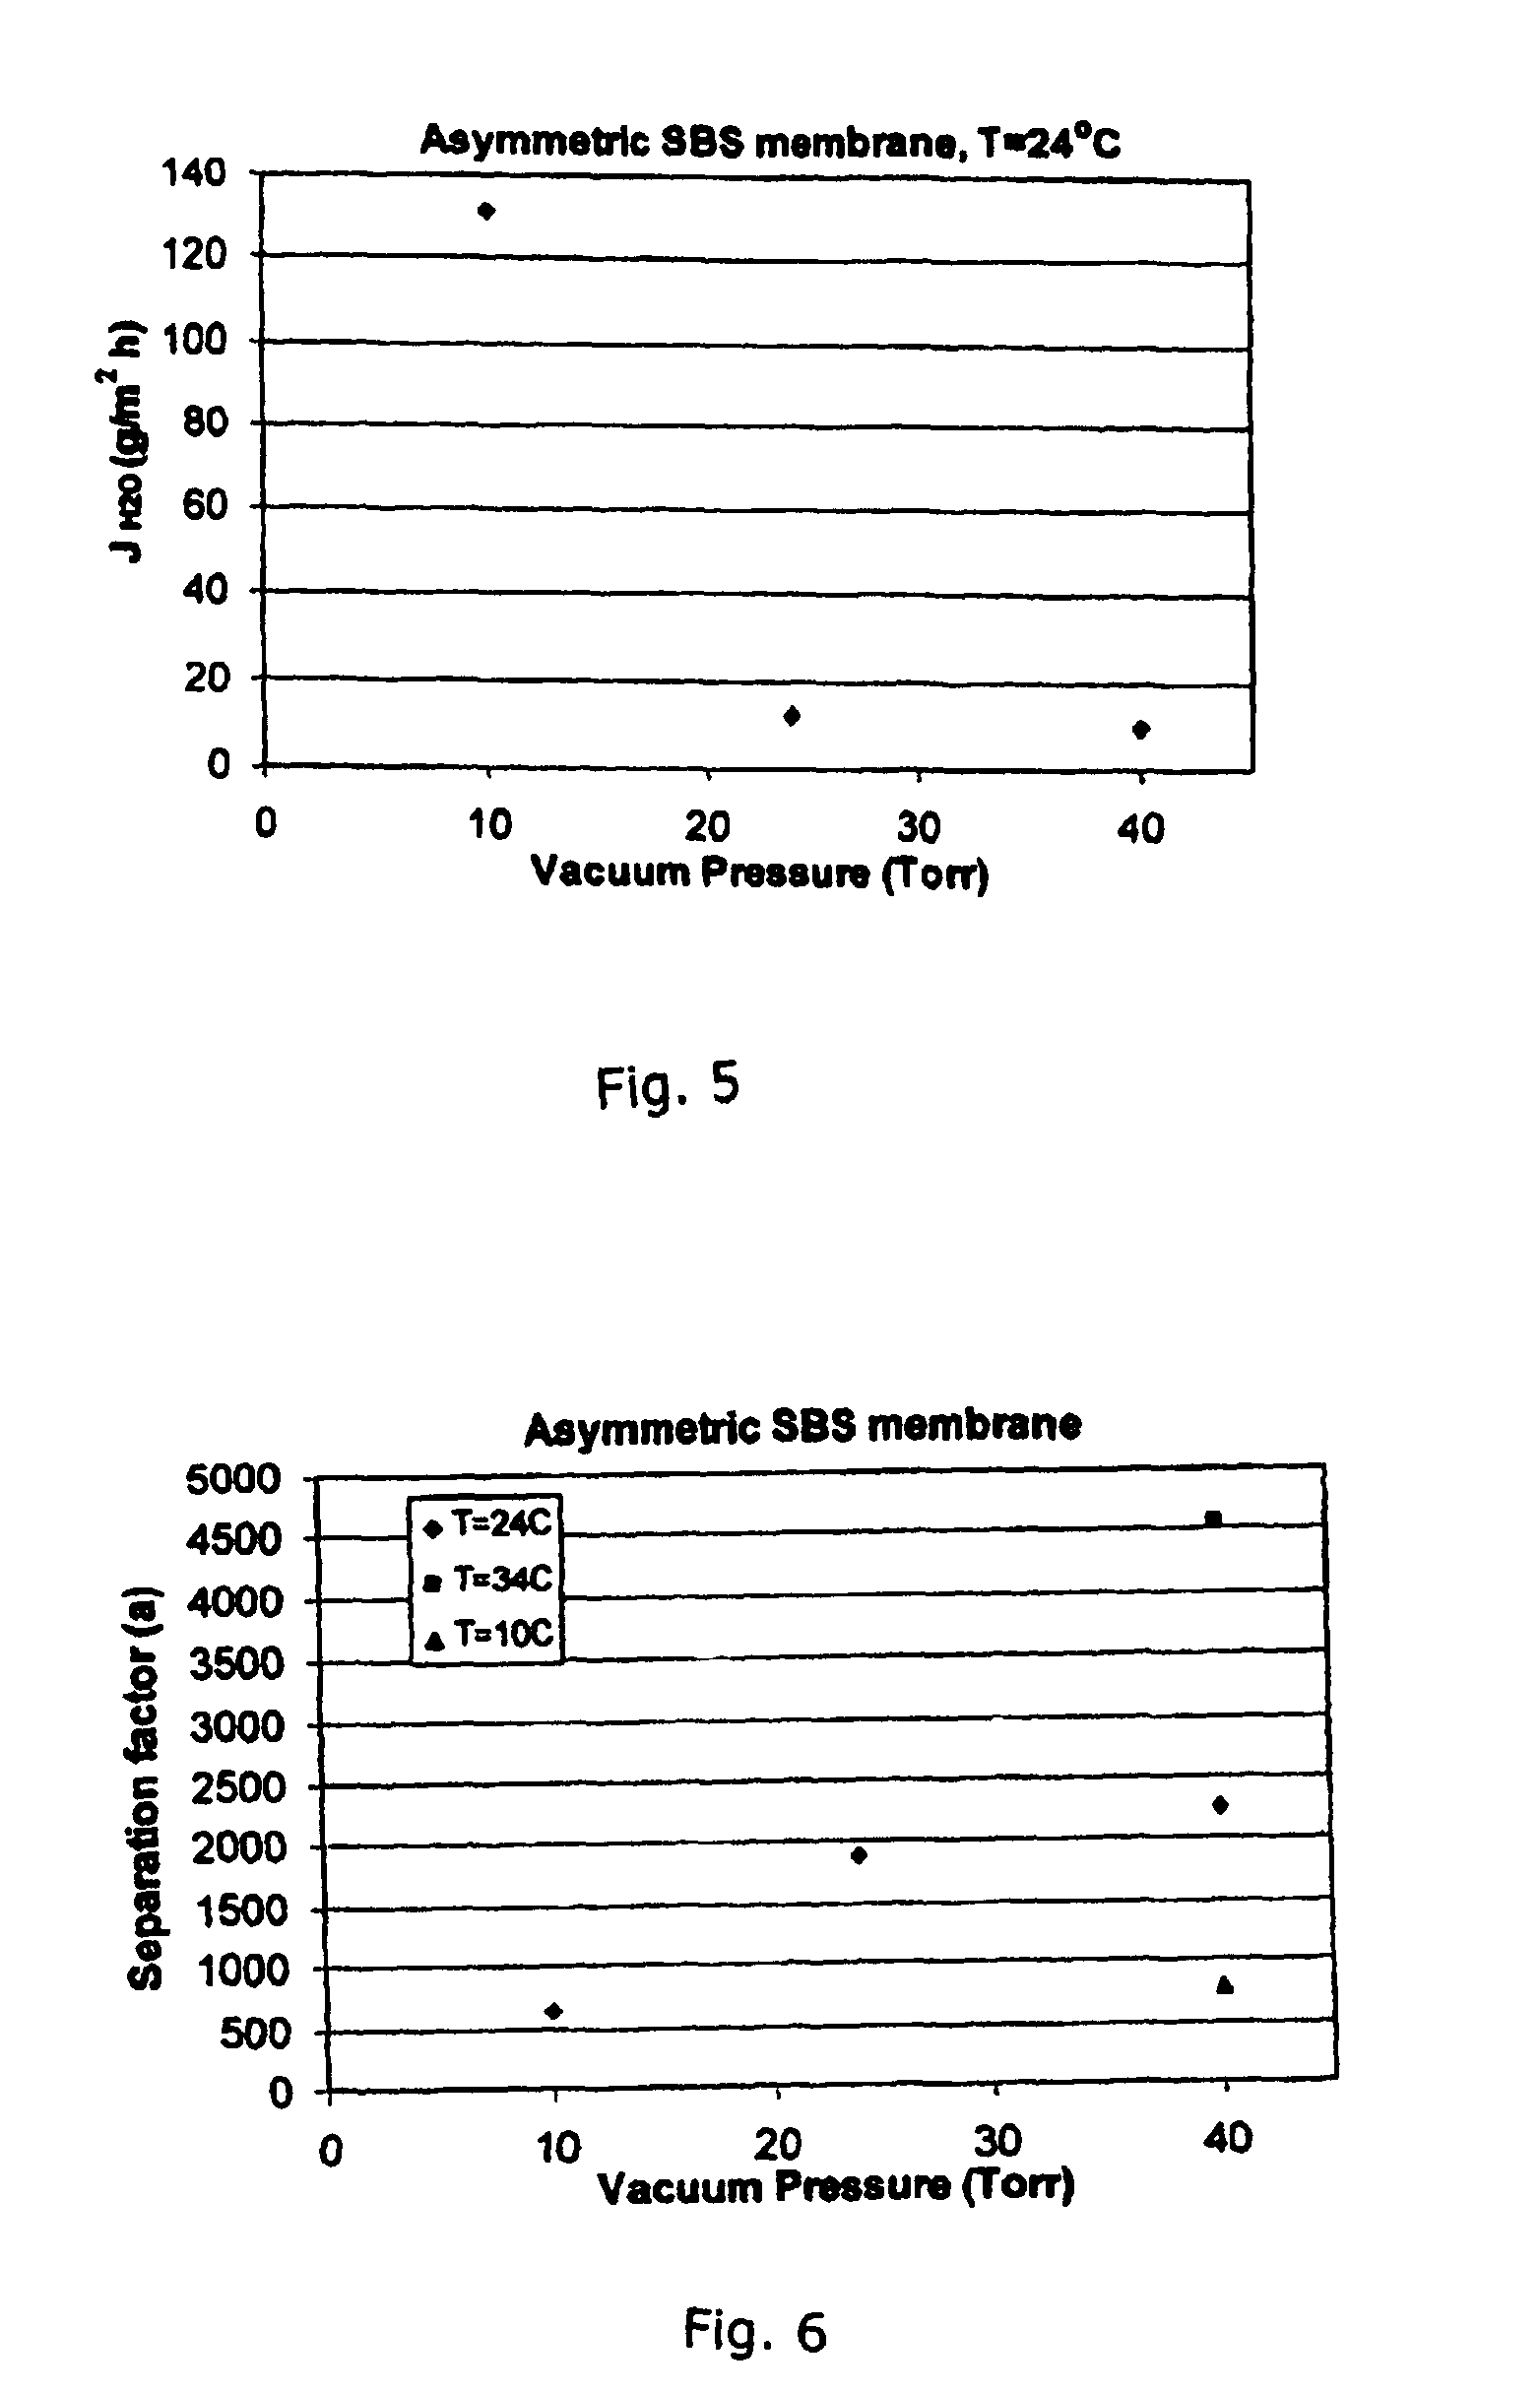 Method for fabrication of elastomeric asymmetric membranes from hydrophobic polymers